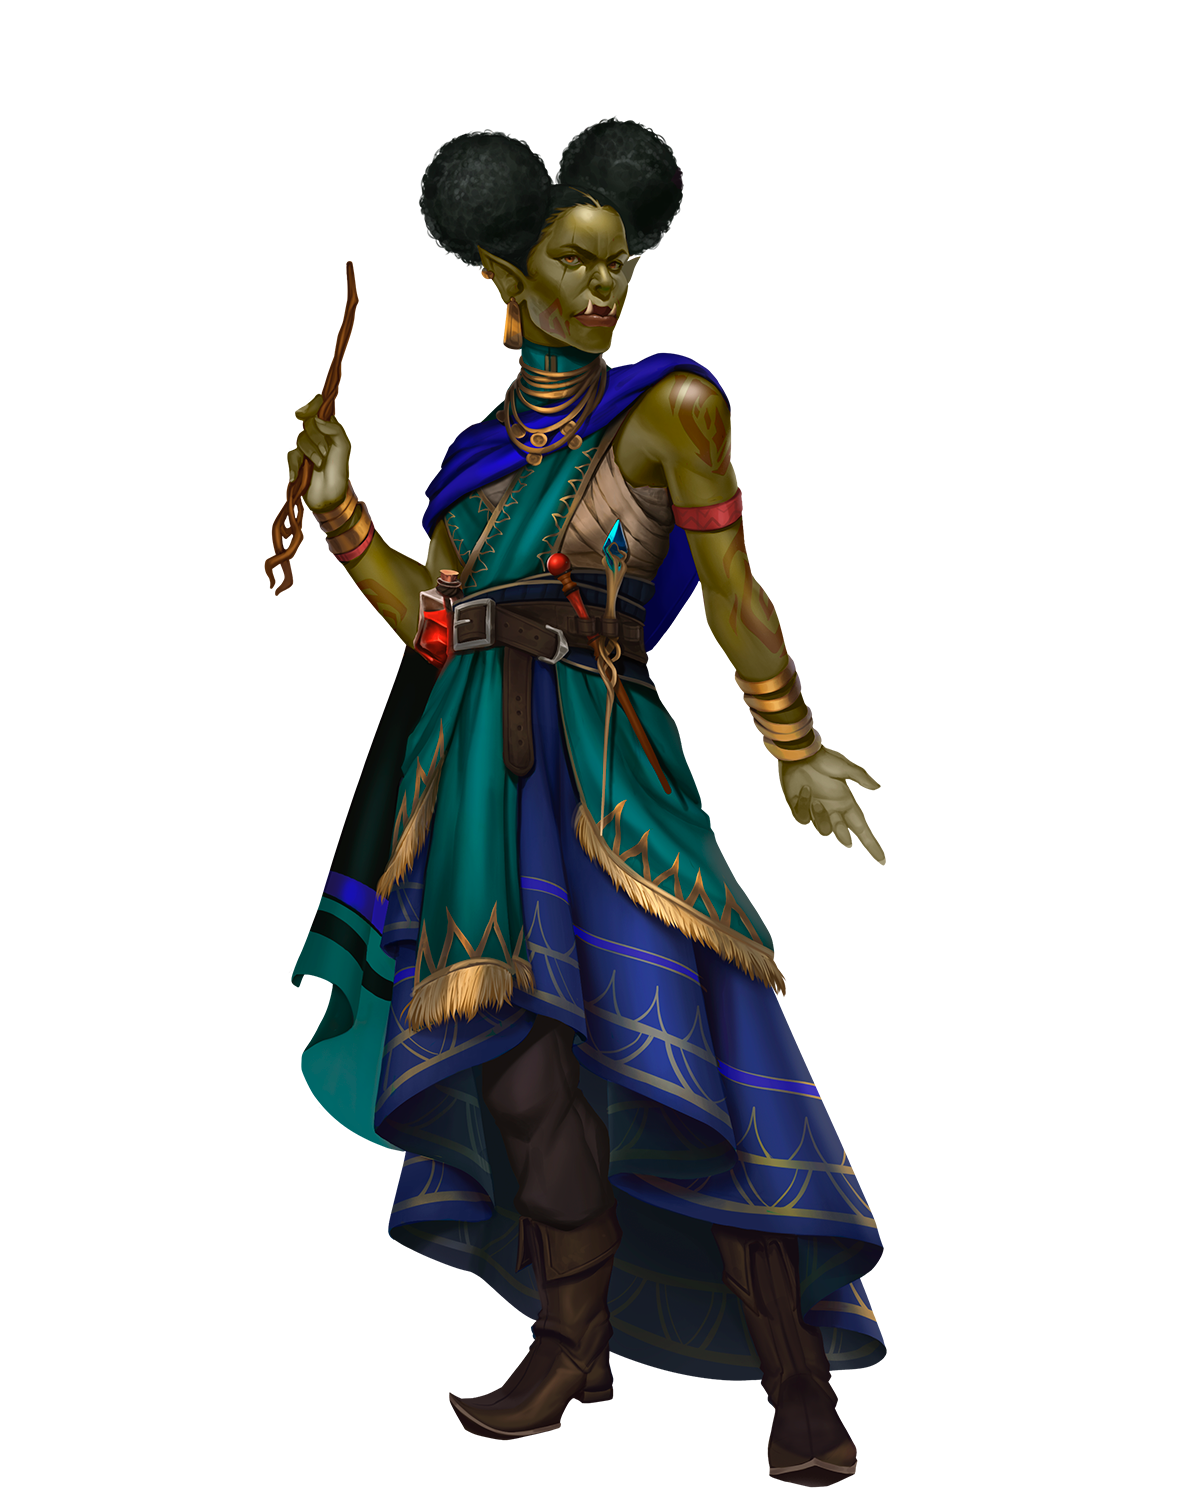 Dhalla Winddancer is an orc wizard, holding a wand. She has a very serious expression.